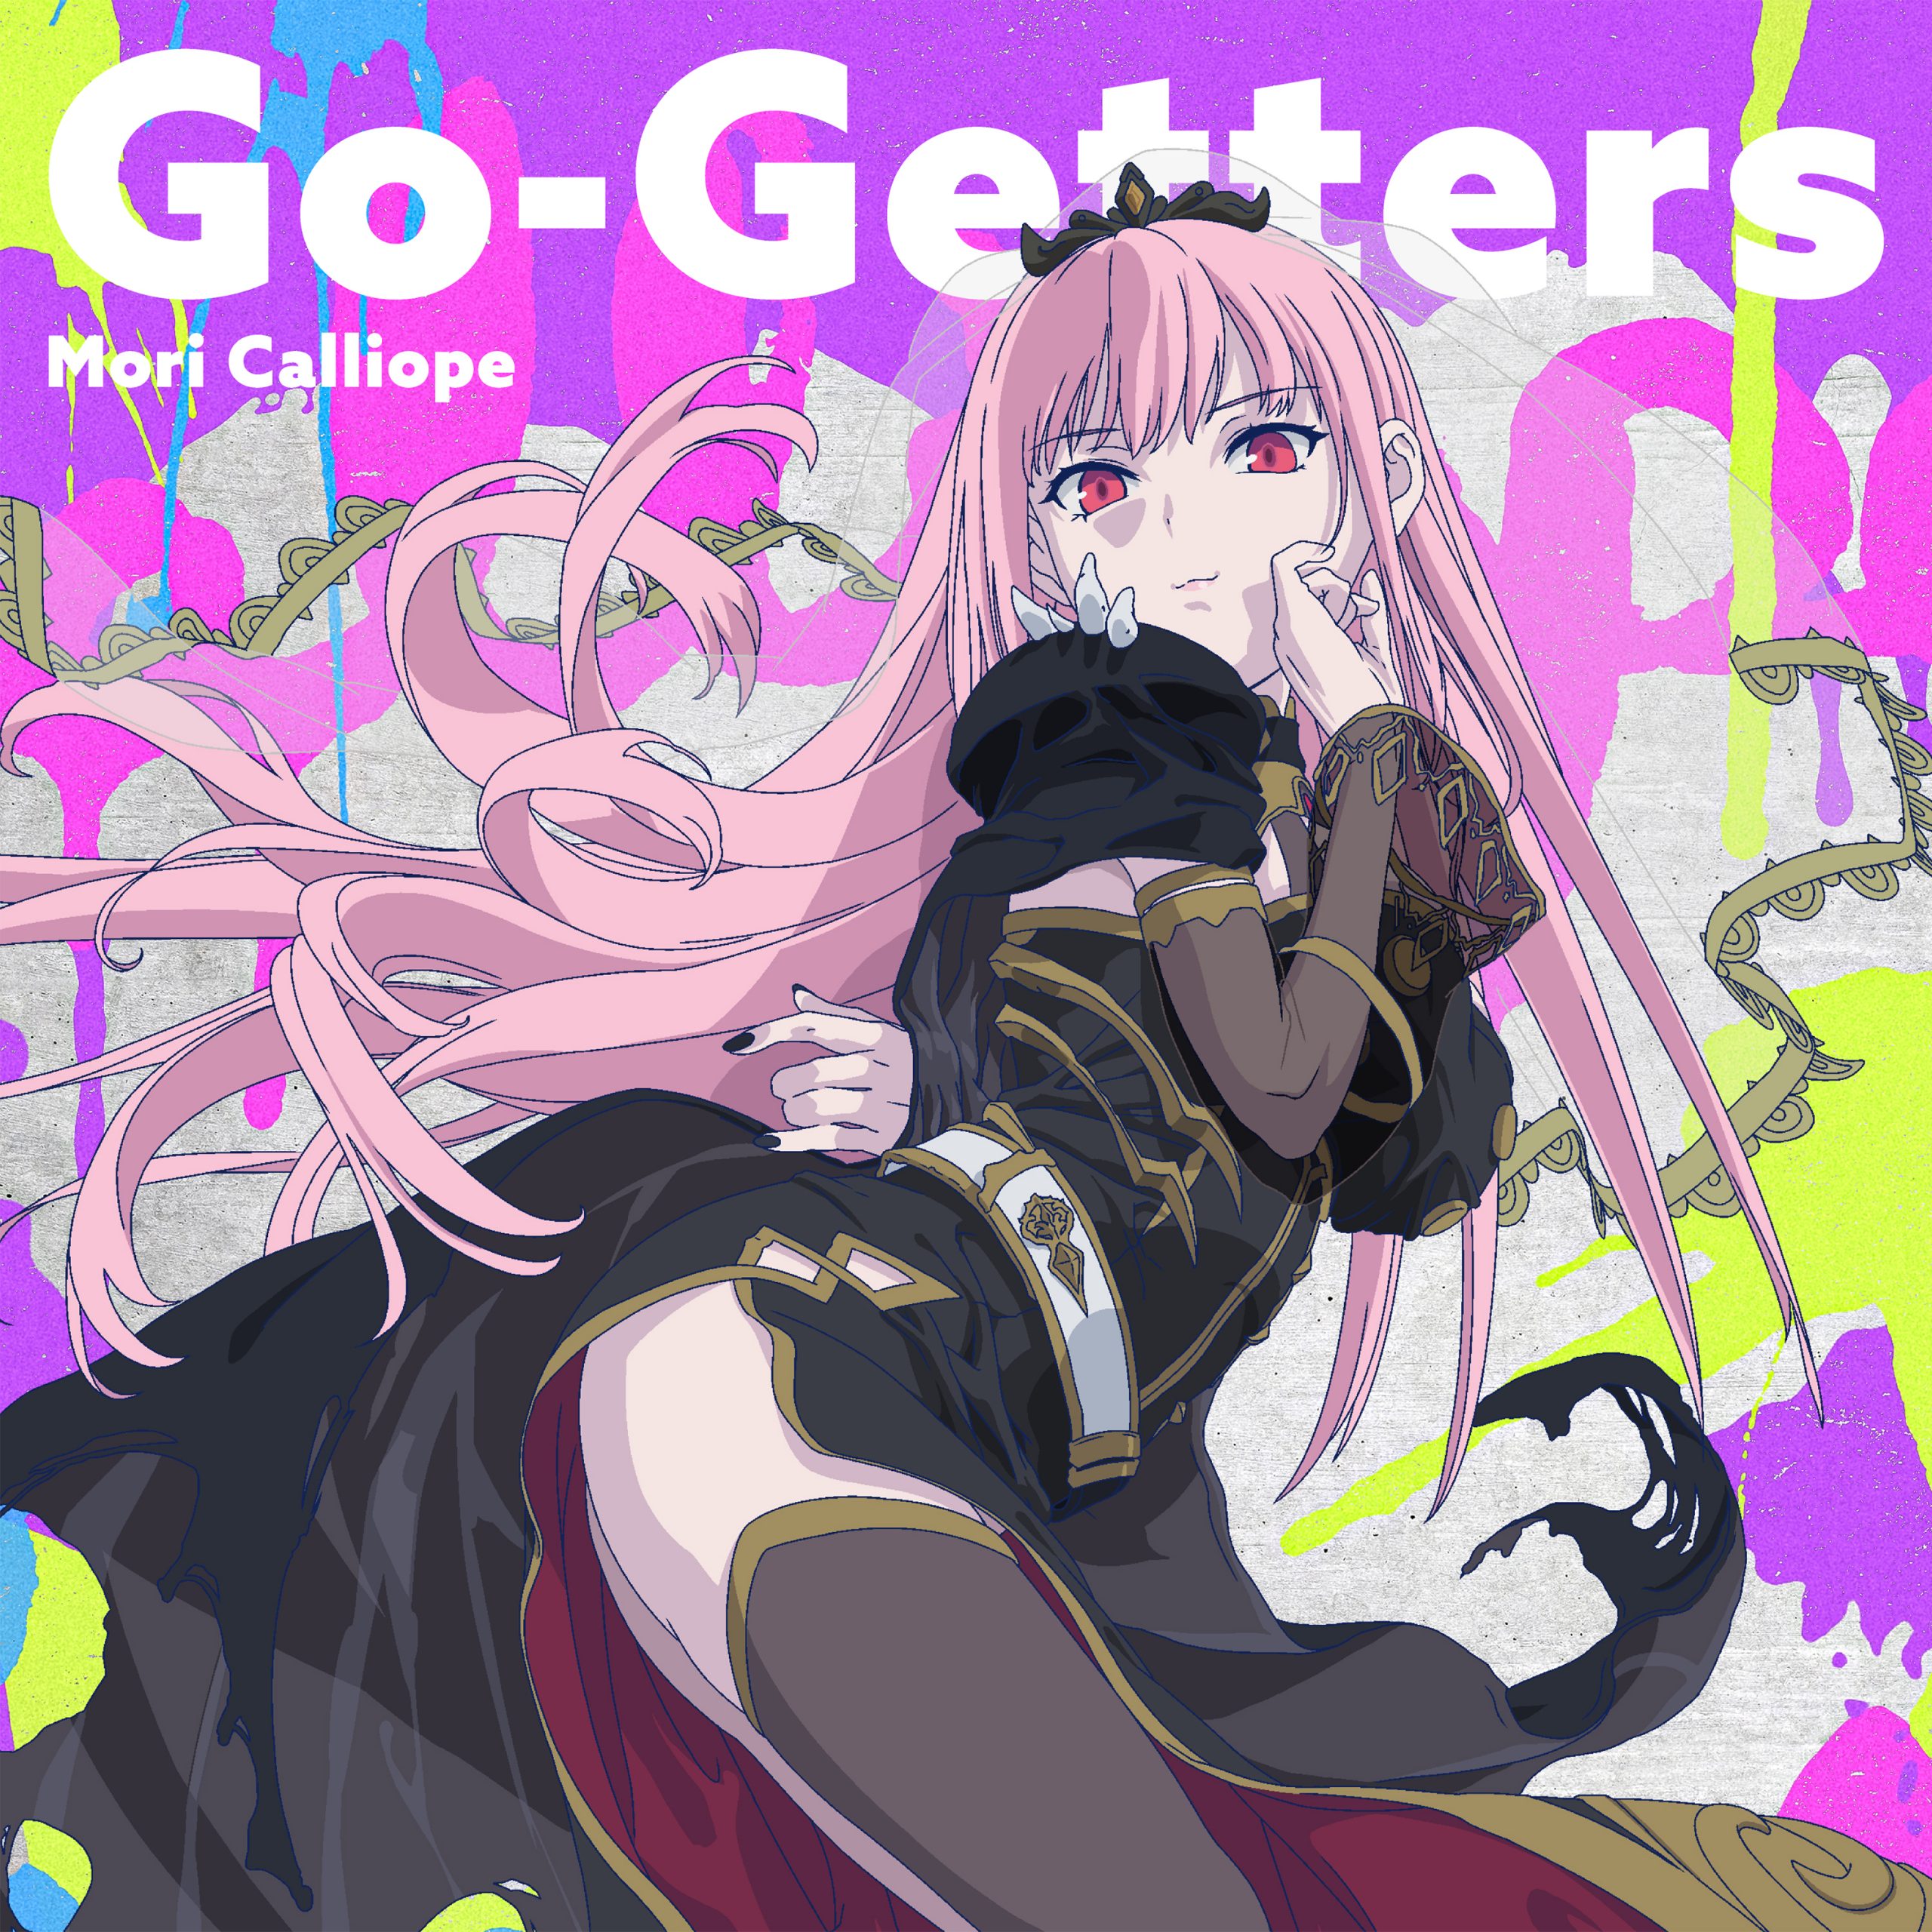 TV-Anime-Suicide-Squad-ISEKAI-ED-video-cut-04 Mori Calliope’s “Go-Getters” from Suicide Squad ISEKAI Now Streaming! Non-Credit Ending Video Pre-Released Ahead of Anime Broadcast!